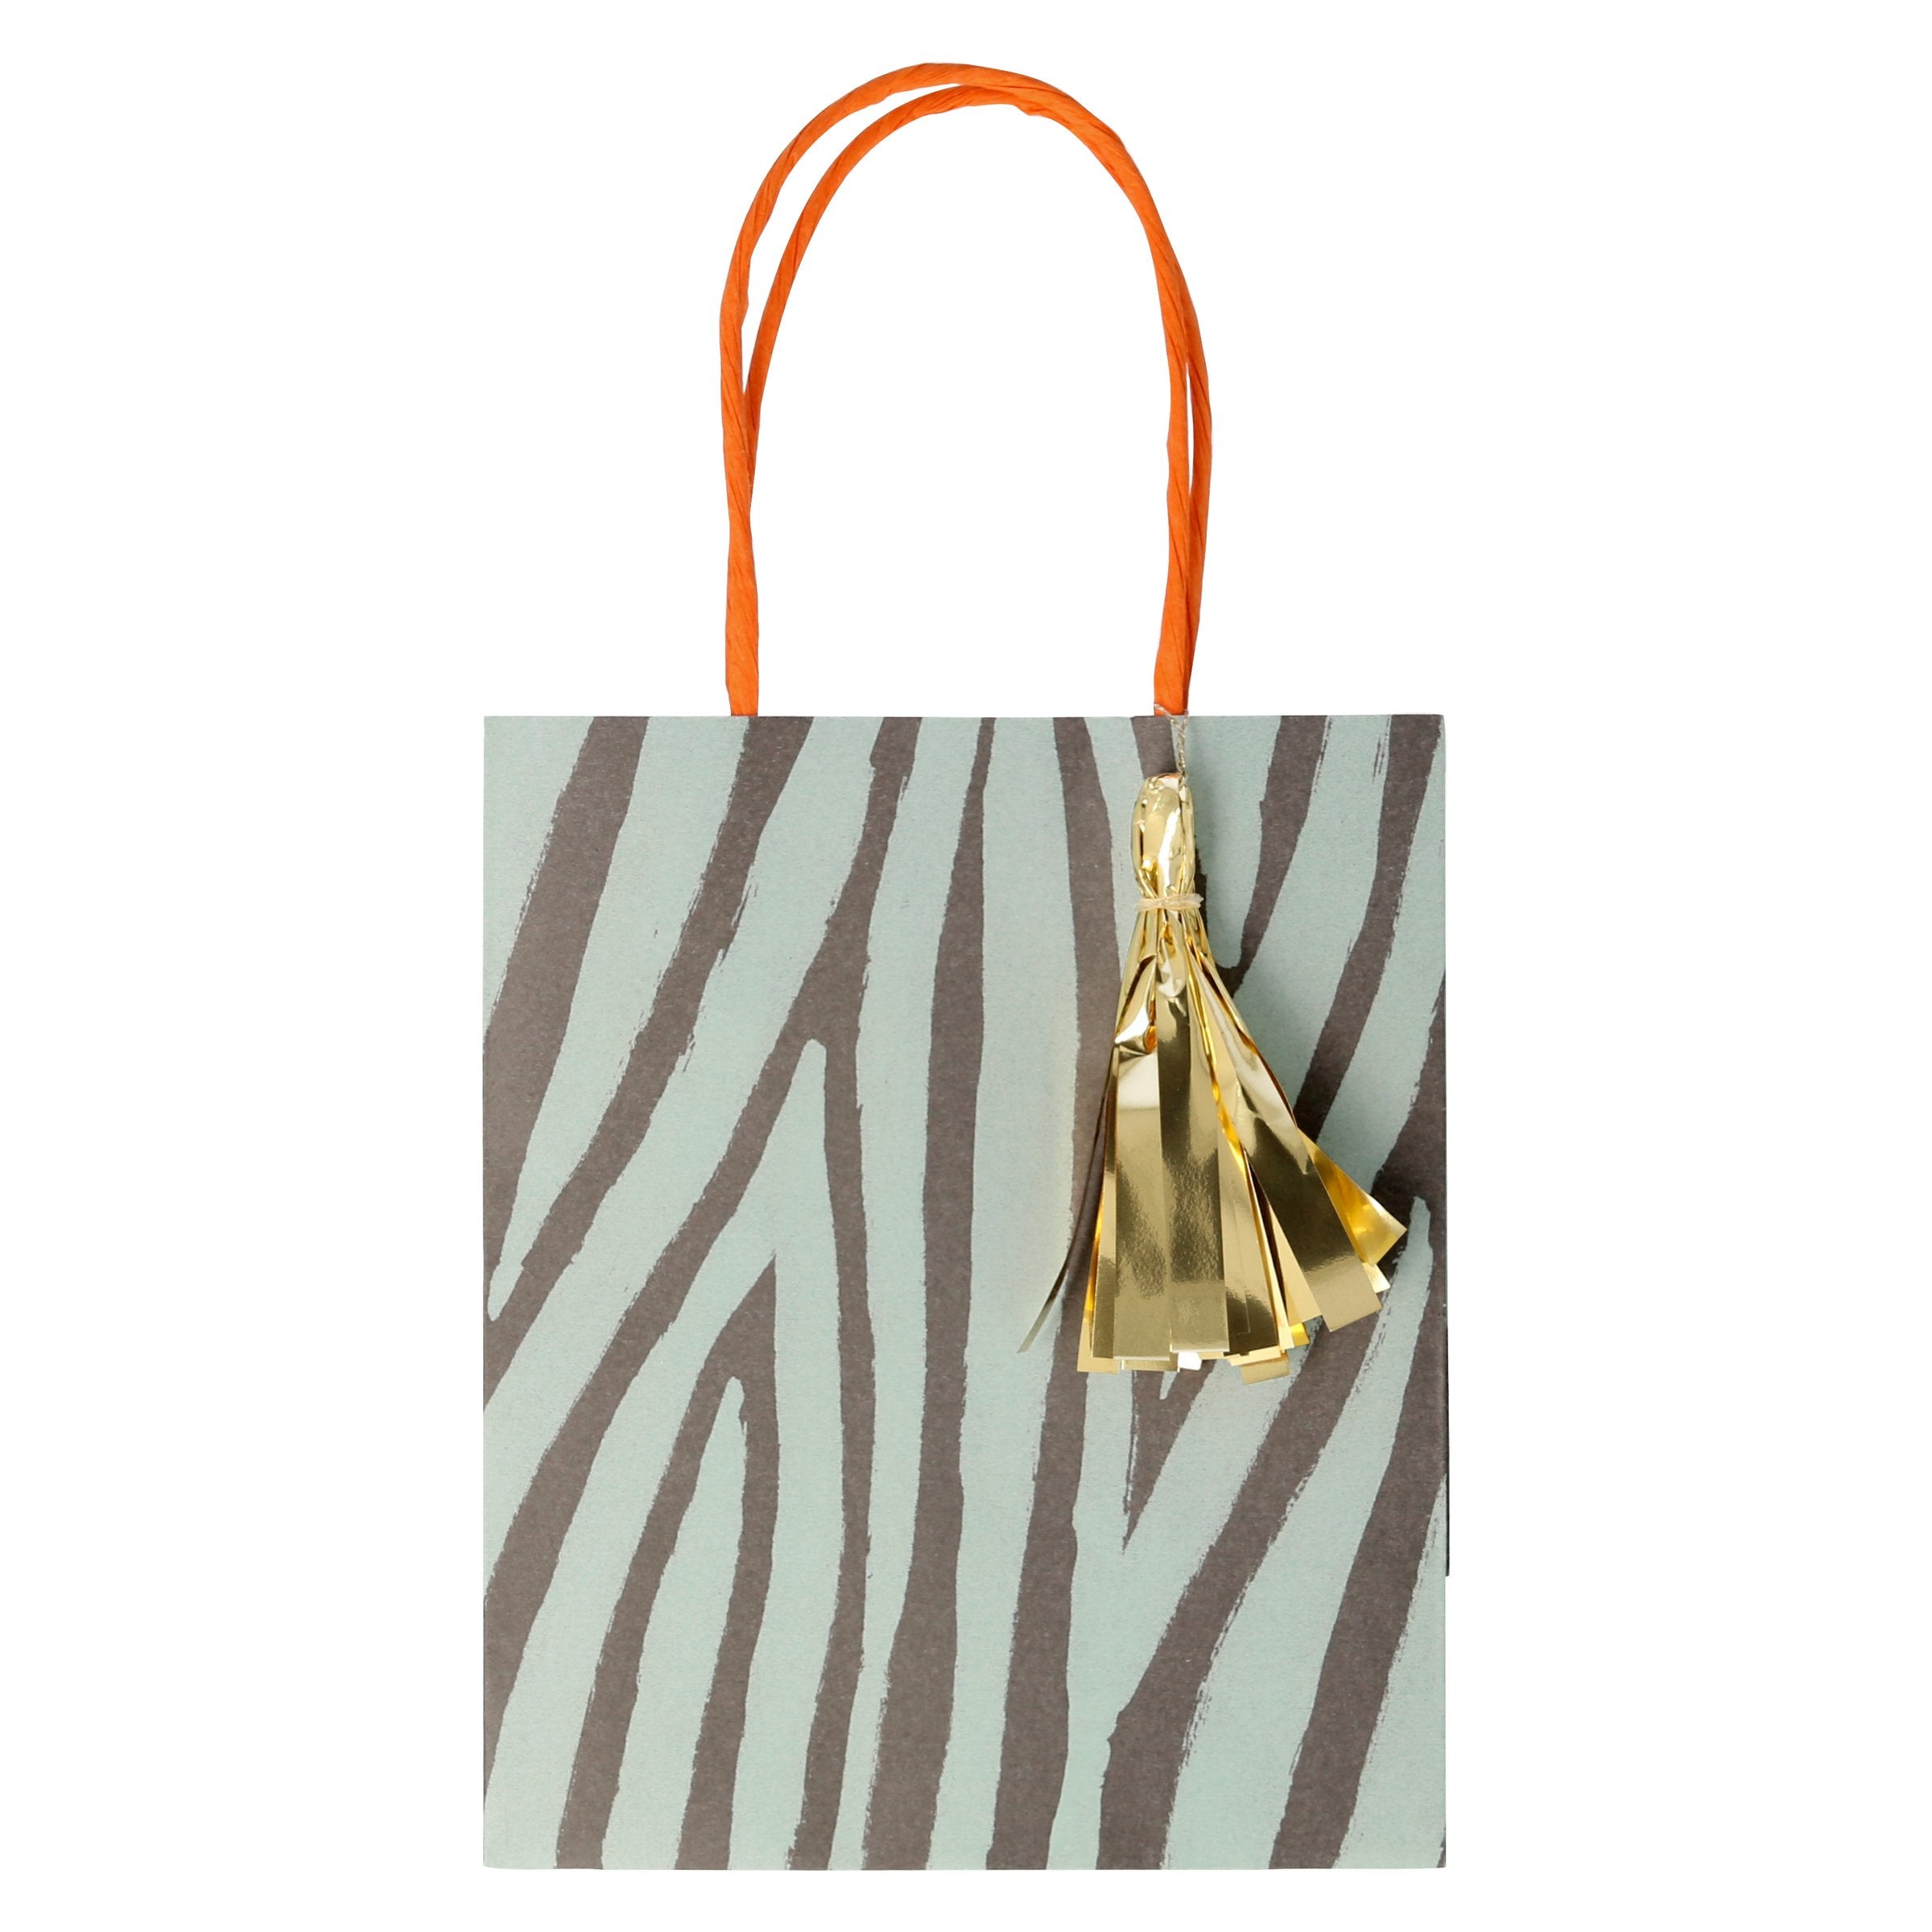 Our party favor bags, with animal prints, are perfect for a safari theme party